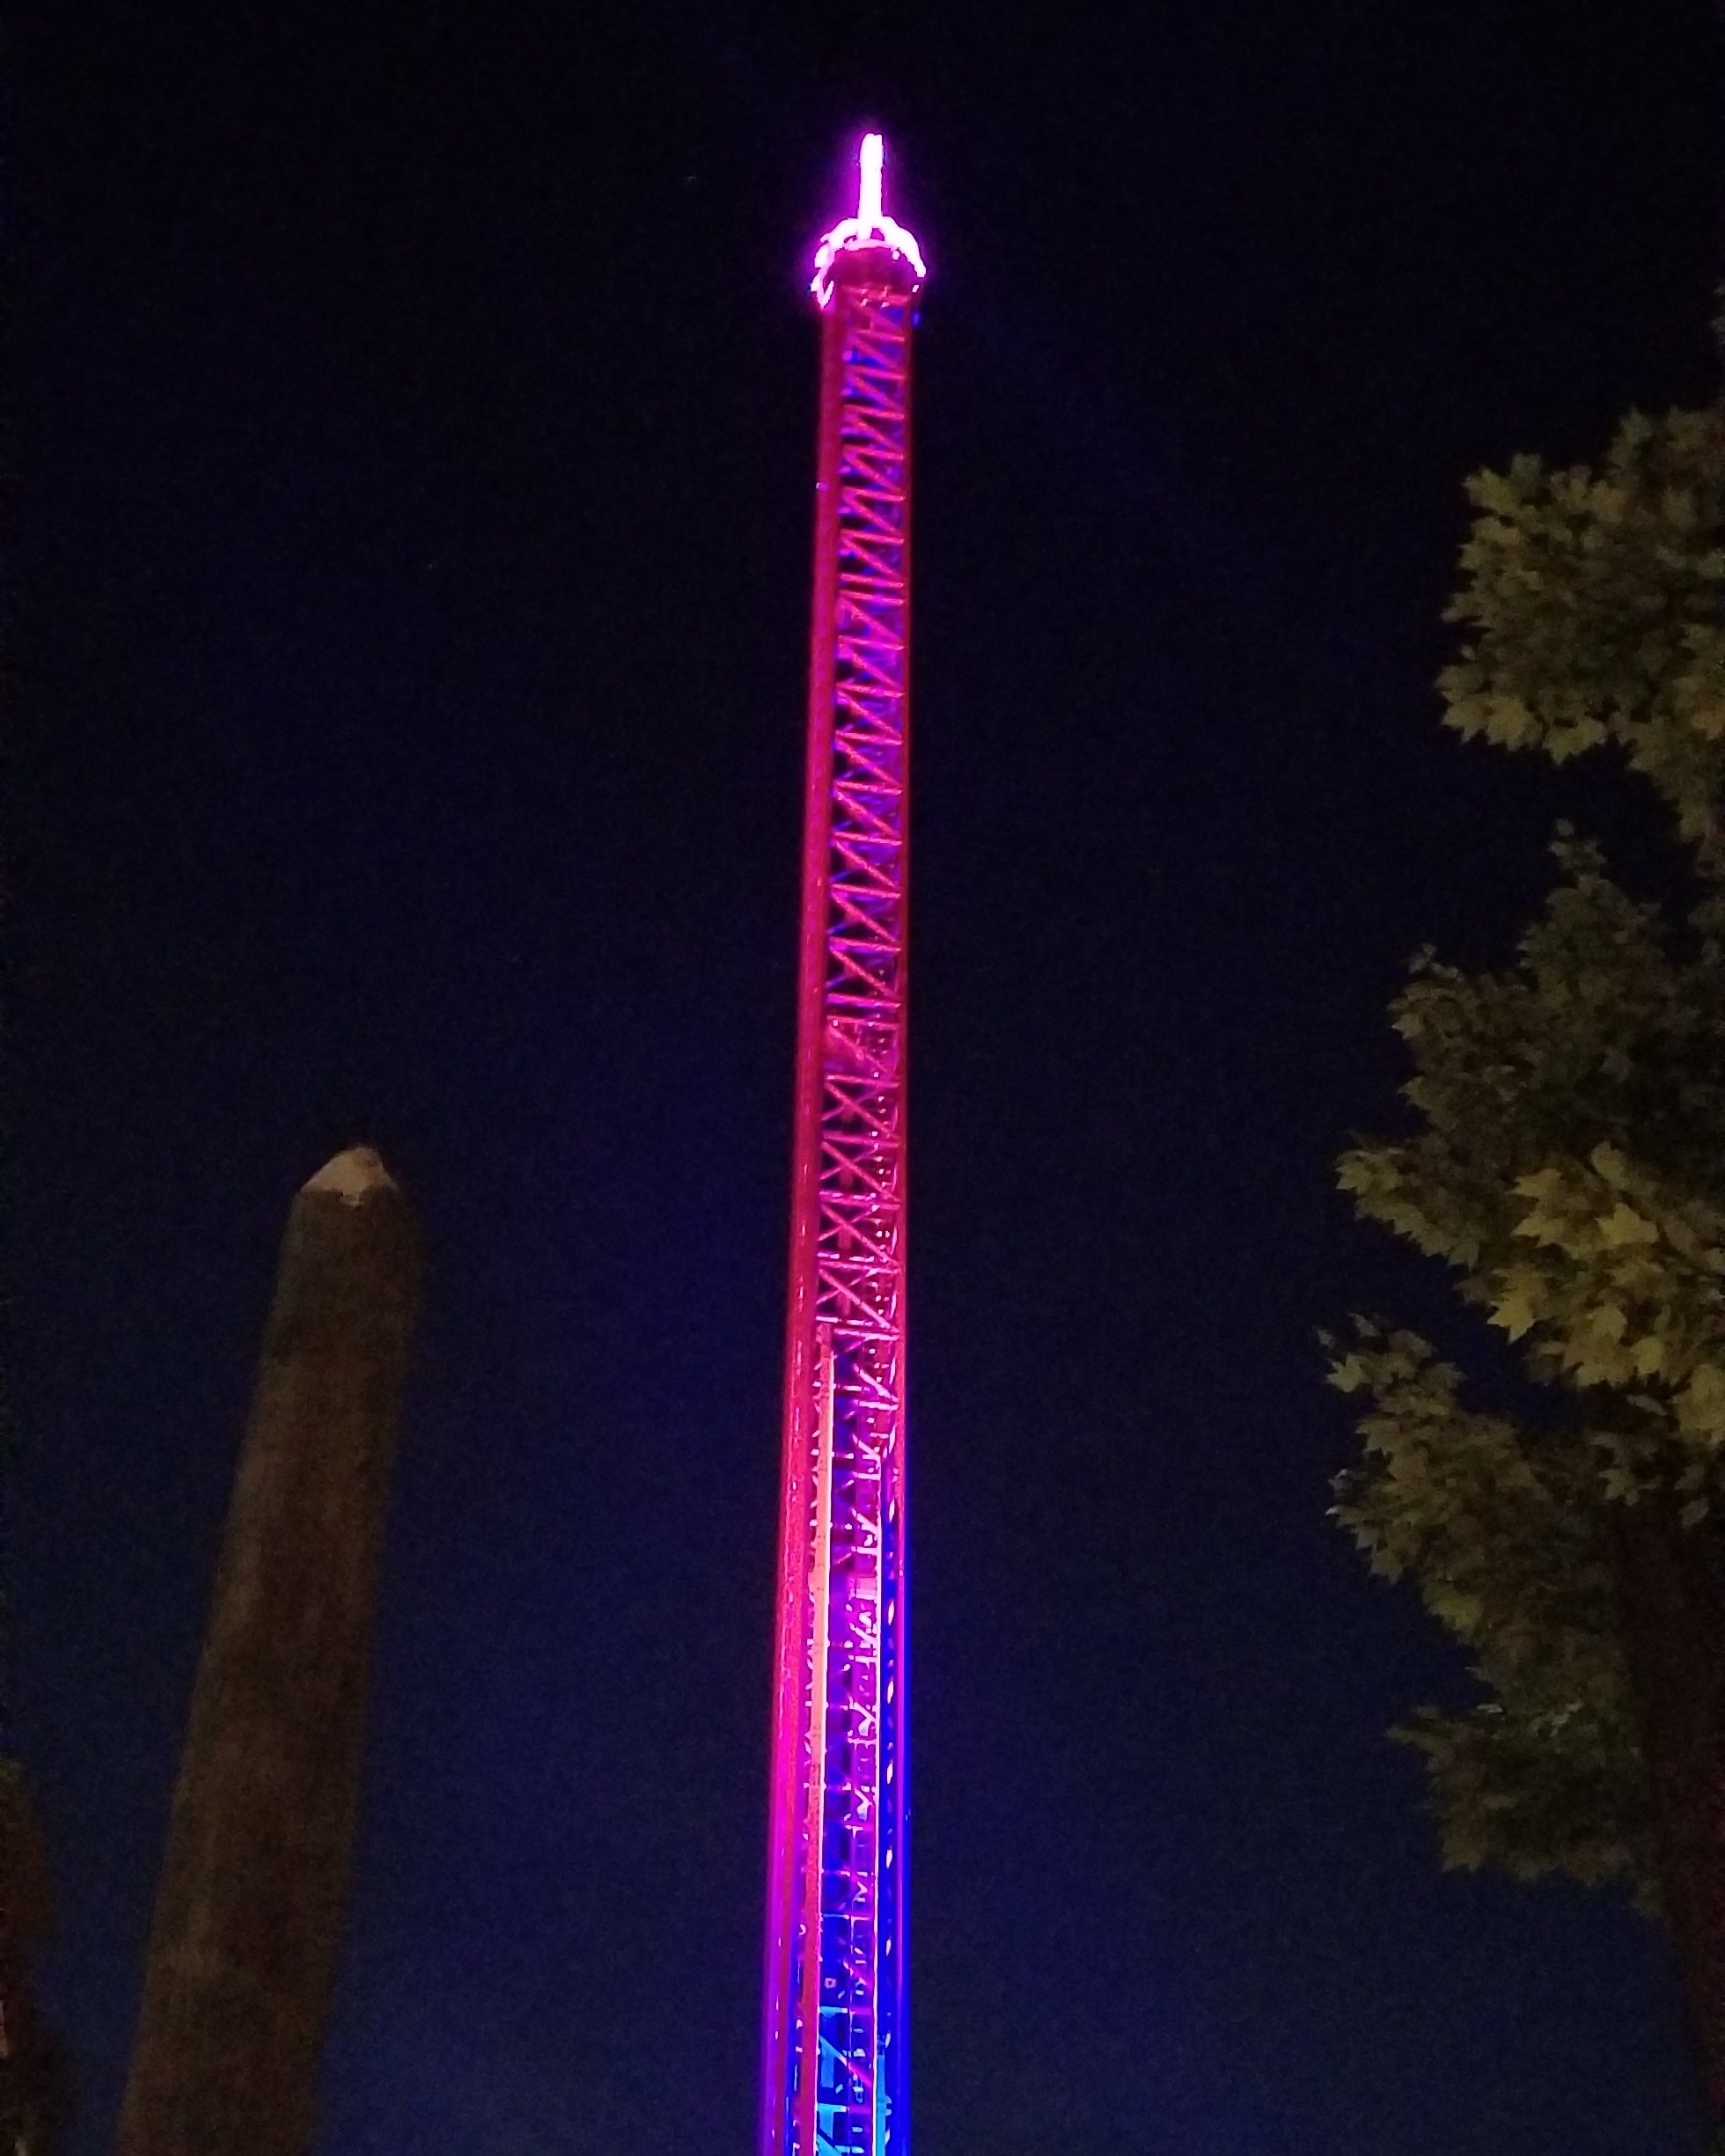  The new Dropline ride is even better to ride at night.  